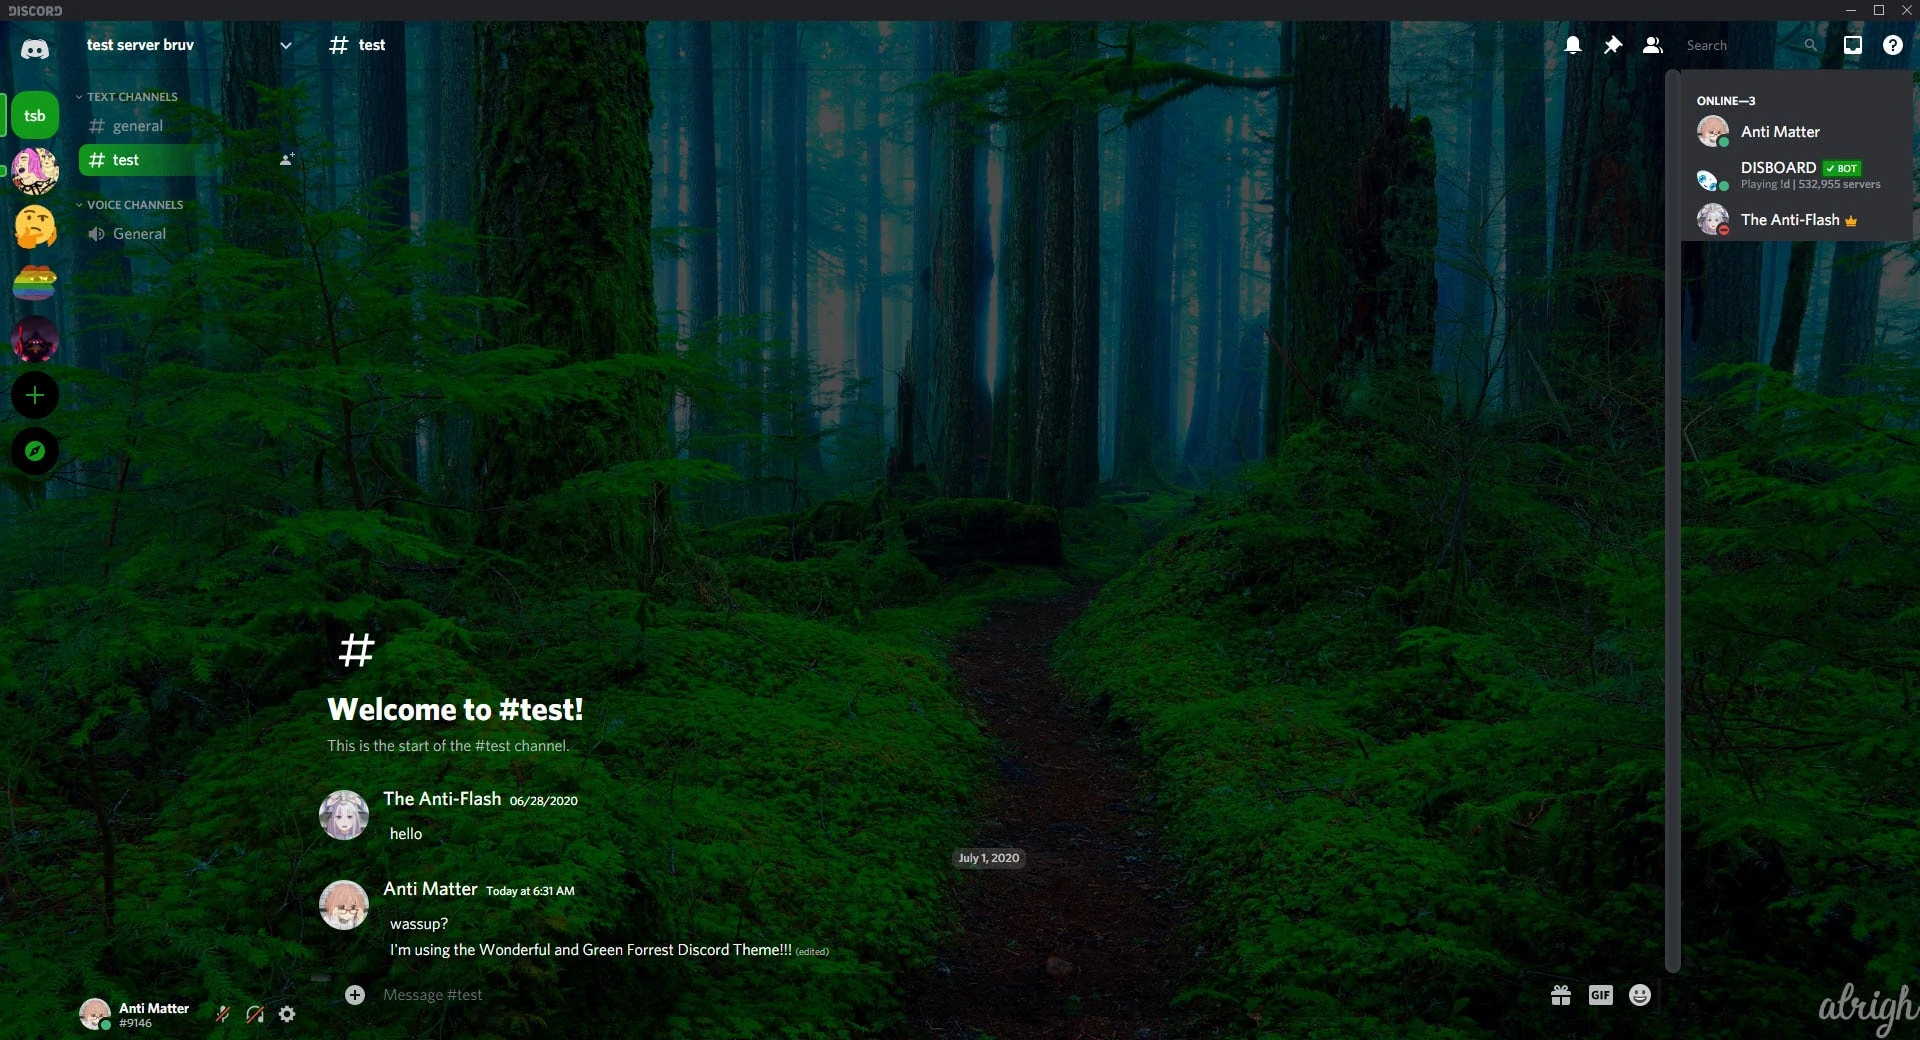 Wonderful and Green Forrest Discord Theme